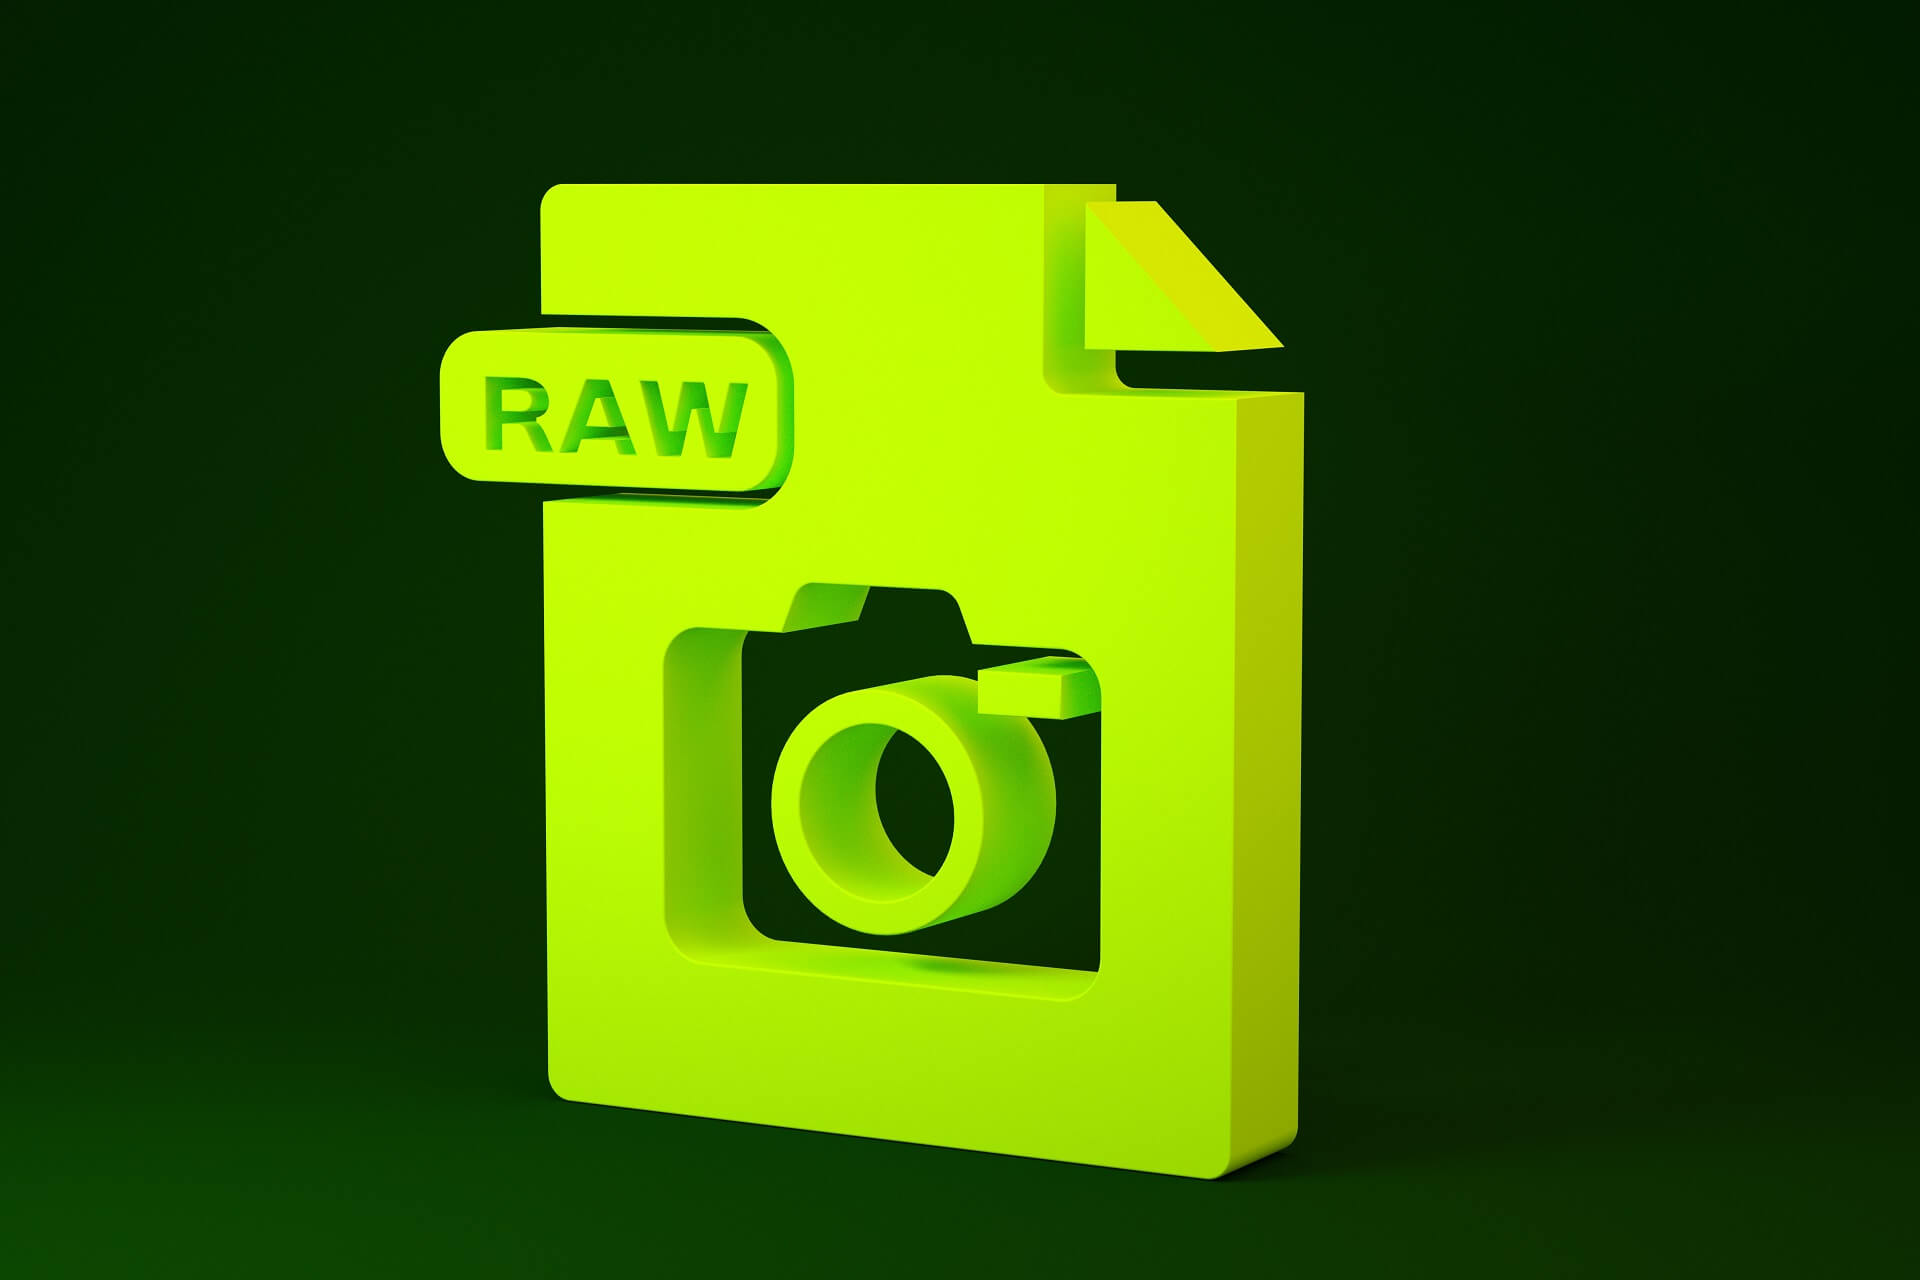 photo viewer in windows 10 is rotating my raw photos featured